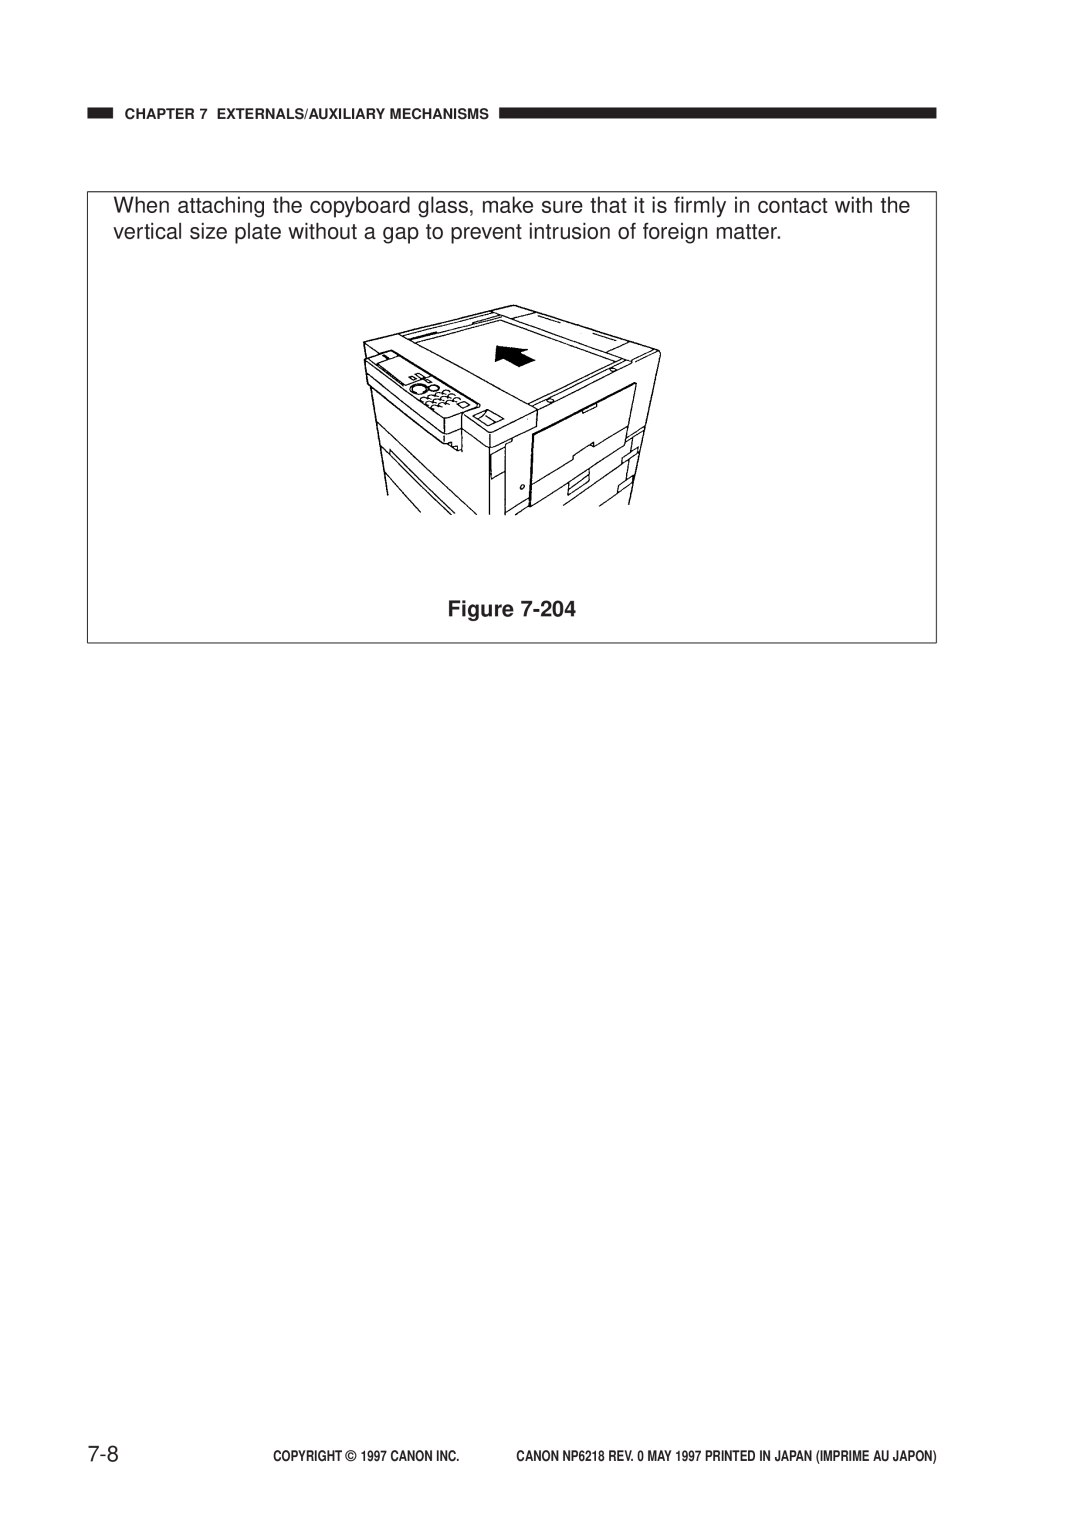 Canon FY8-13EX-000, NP6218 service manual Externals/Auxiliary Mechanisms, COPYRIGHT 1997 CANON INC 